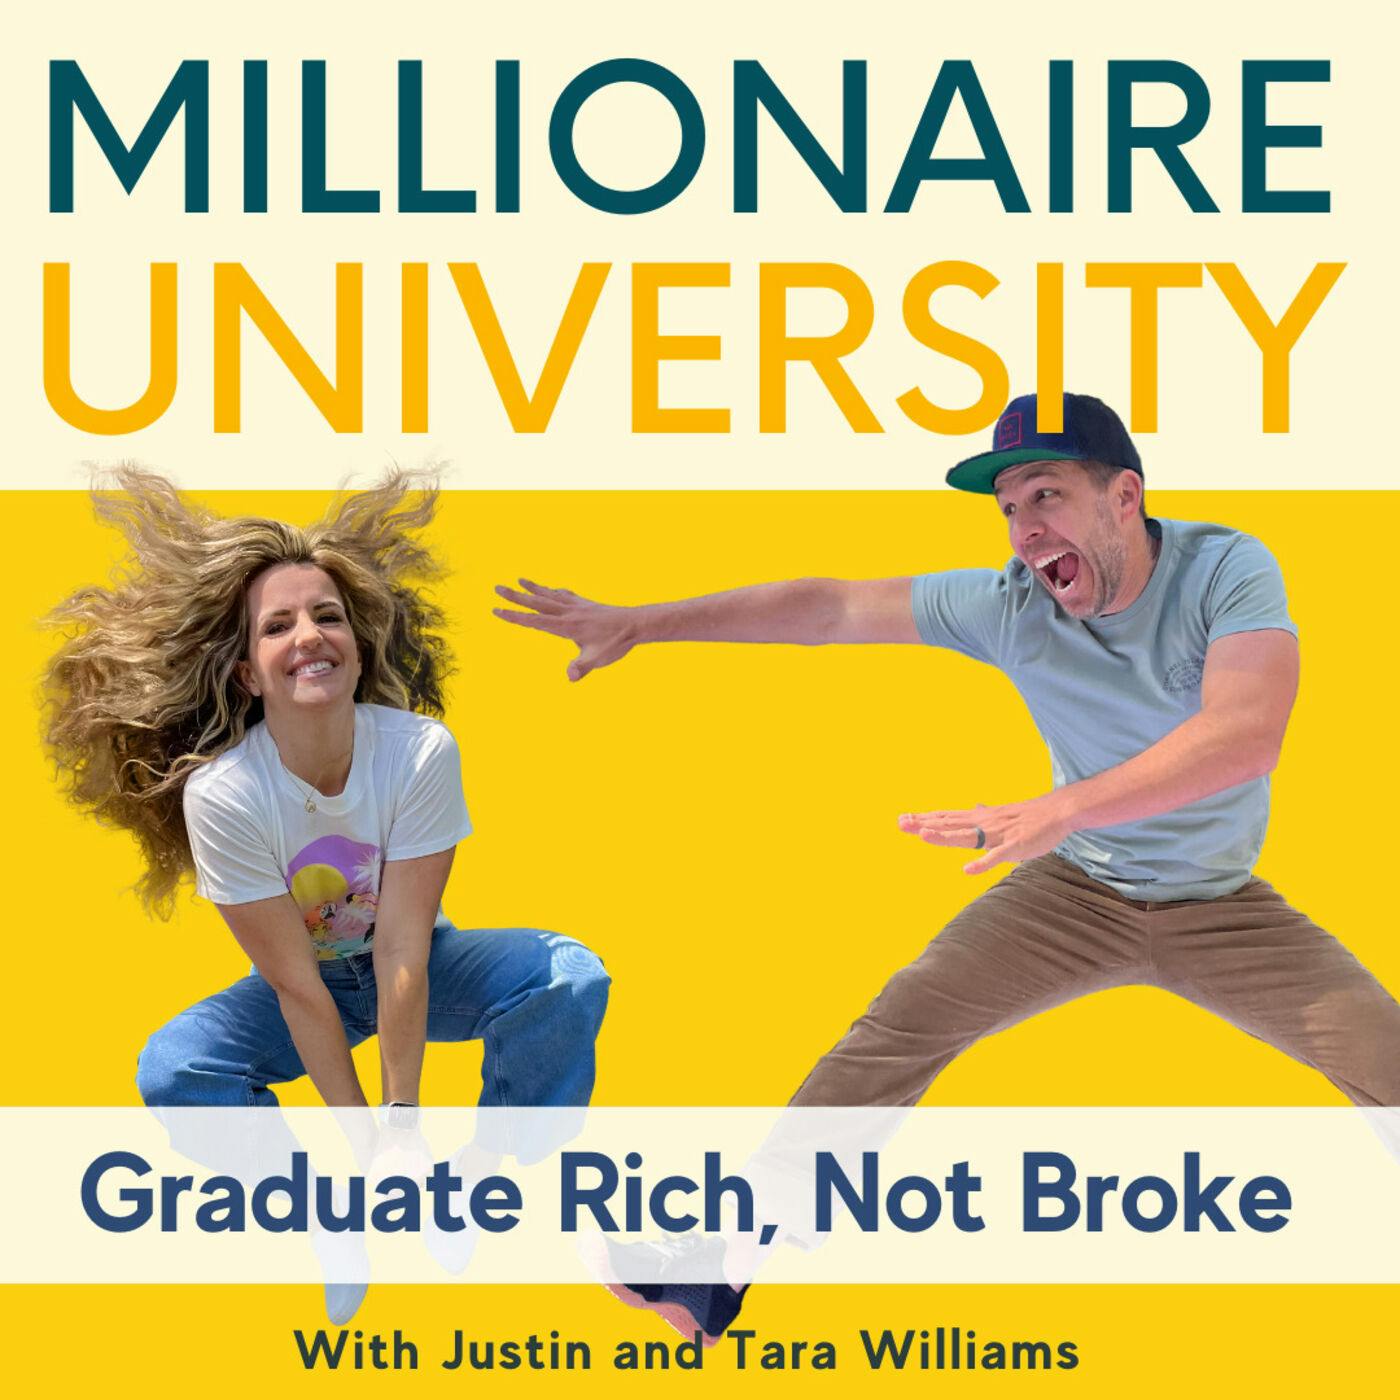 You Might Also Like: Millionaire University